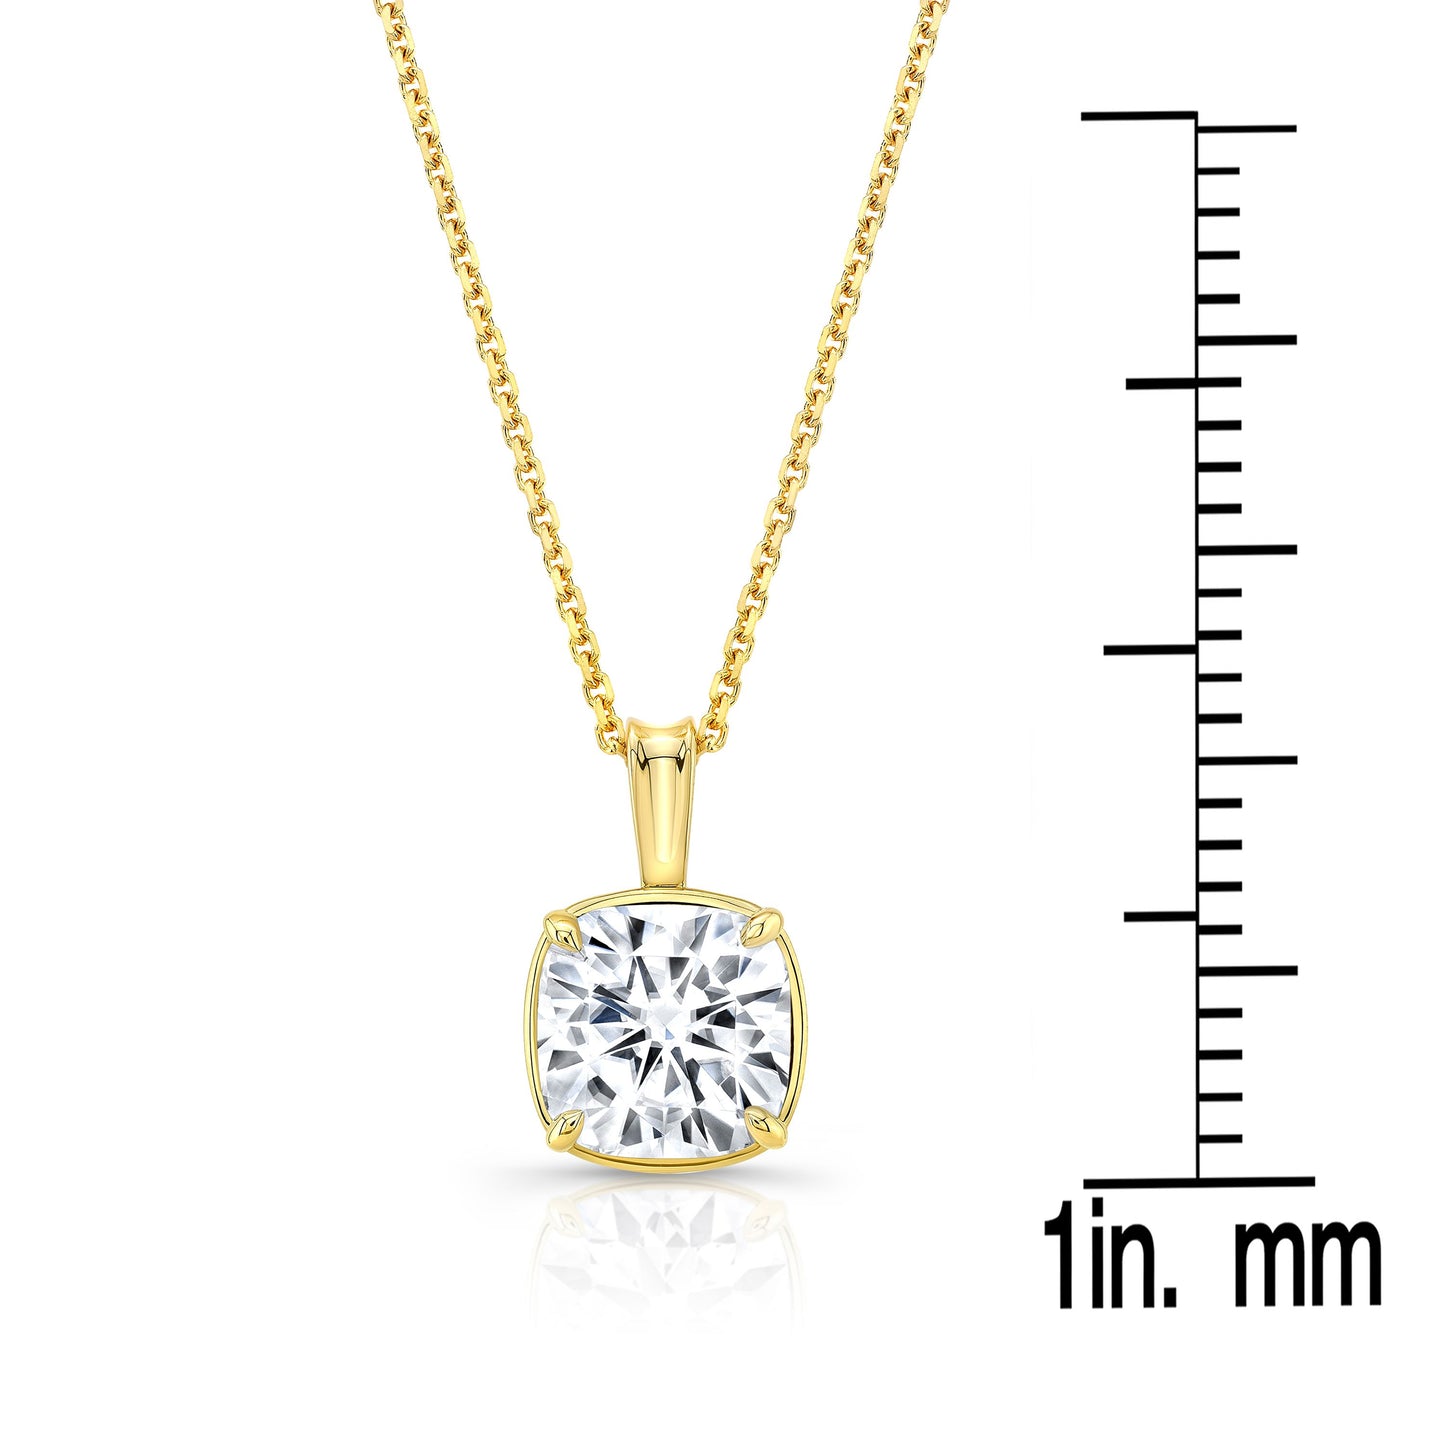 Cushion Diamond Solitaire Pendant In A 14k Yellow Gold 4-prong Leaf Scroll Setting, 2.24ct. T.w. (i, Vs1 Gia)